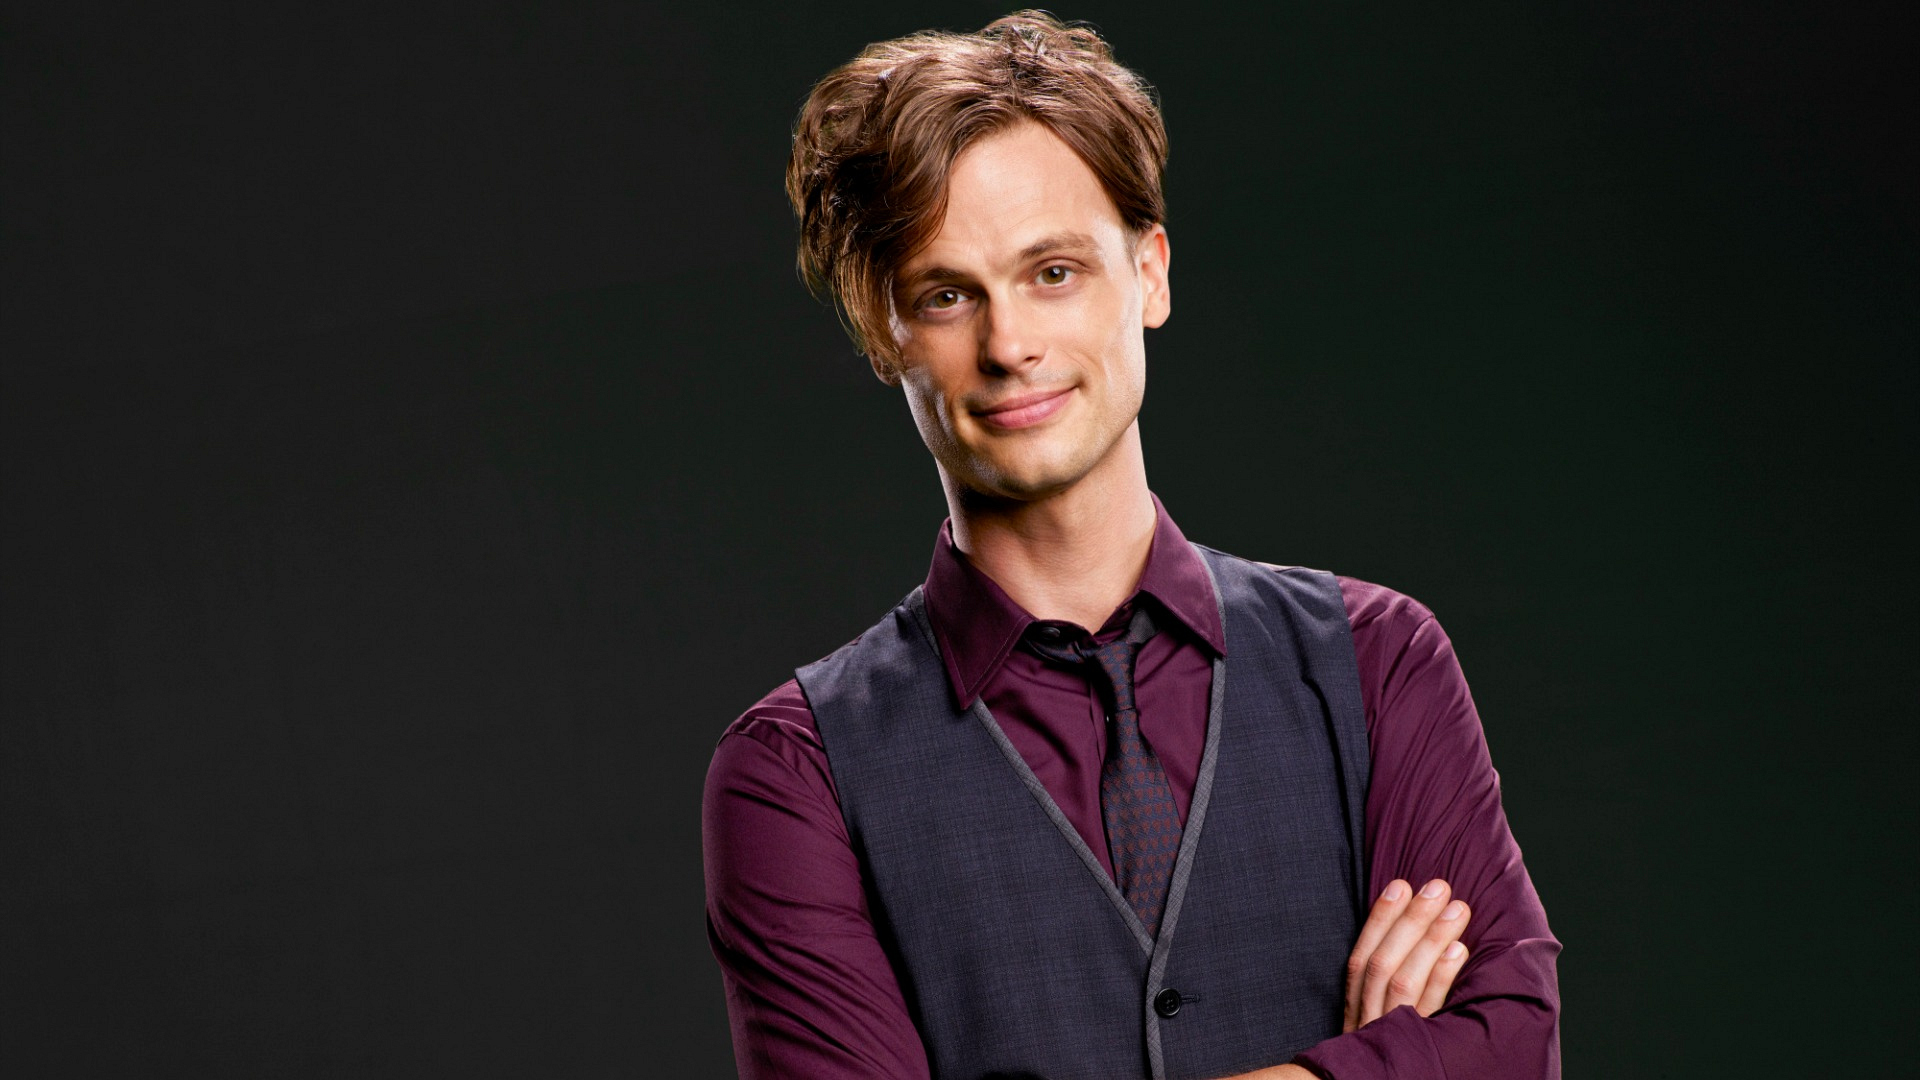 The Hairstyles Of Dr. Spencer Reid - Page 10 - Criminal Minds Photos - CBS.com1920 x 1080